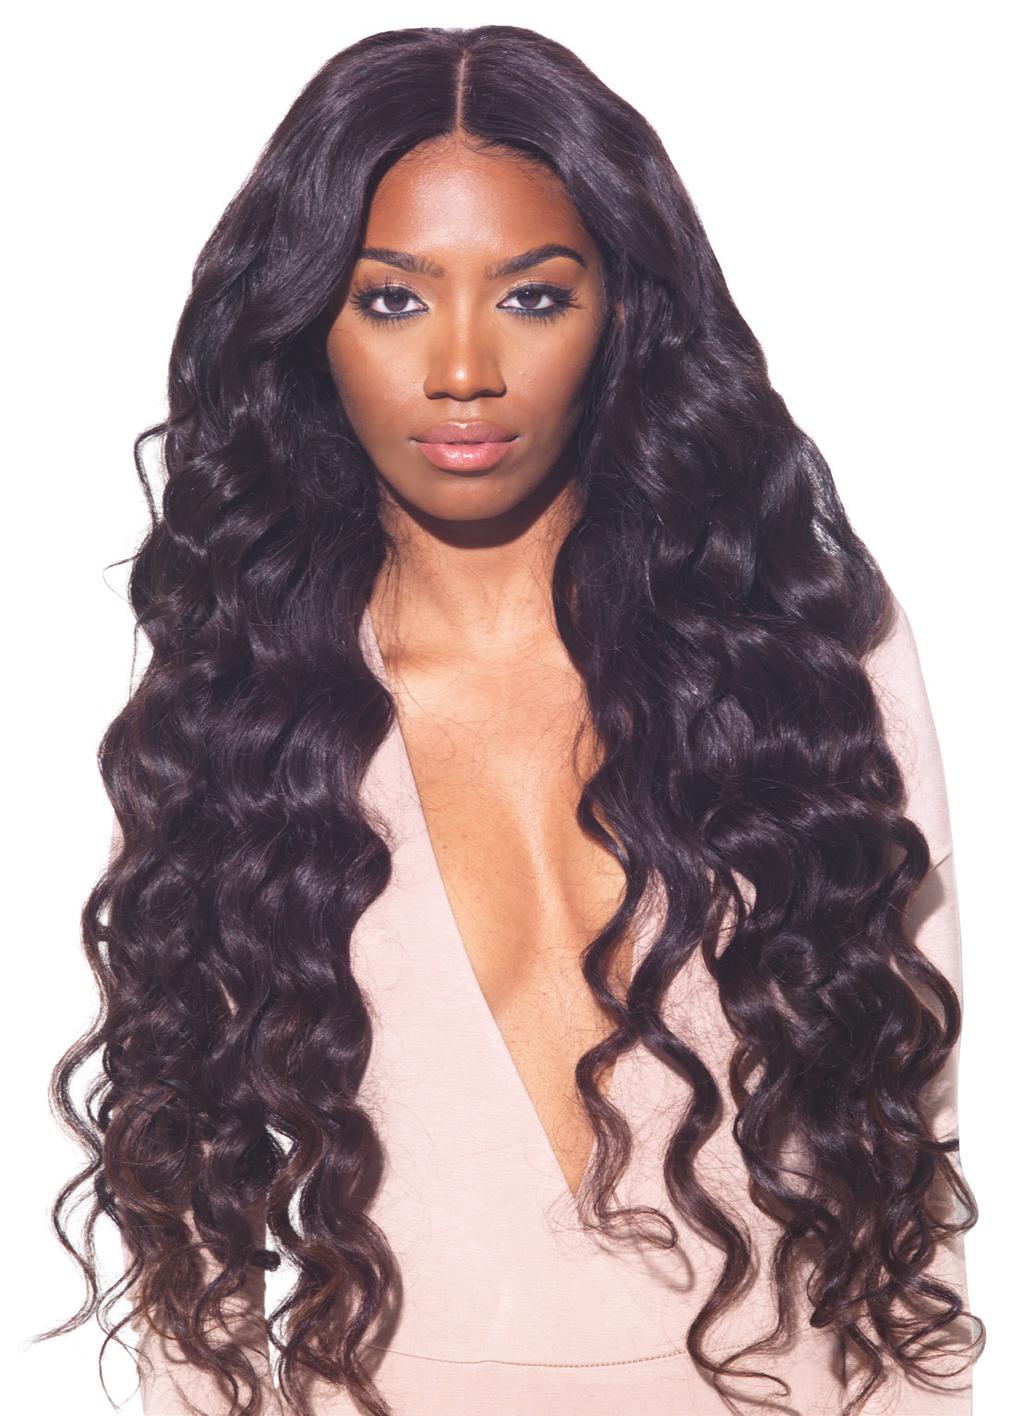 Brazilian Wavy Our virgin Brazilian Wavy hair has a loose wave pattern which makes it extremely easy to style and maintain. It holds curls beautifully, yet has the ability to be worn straight.